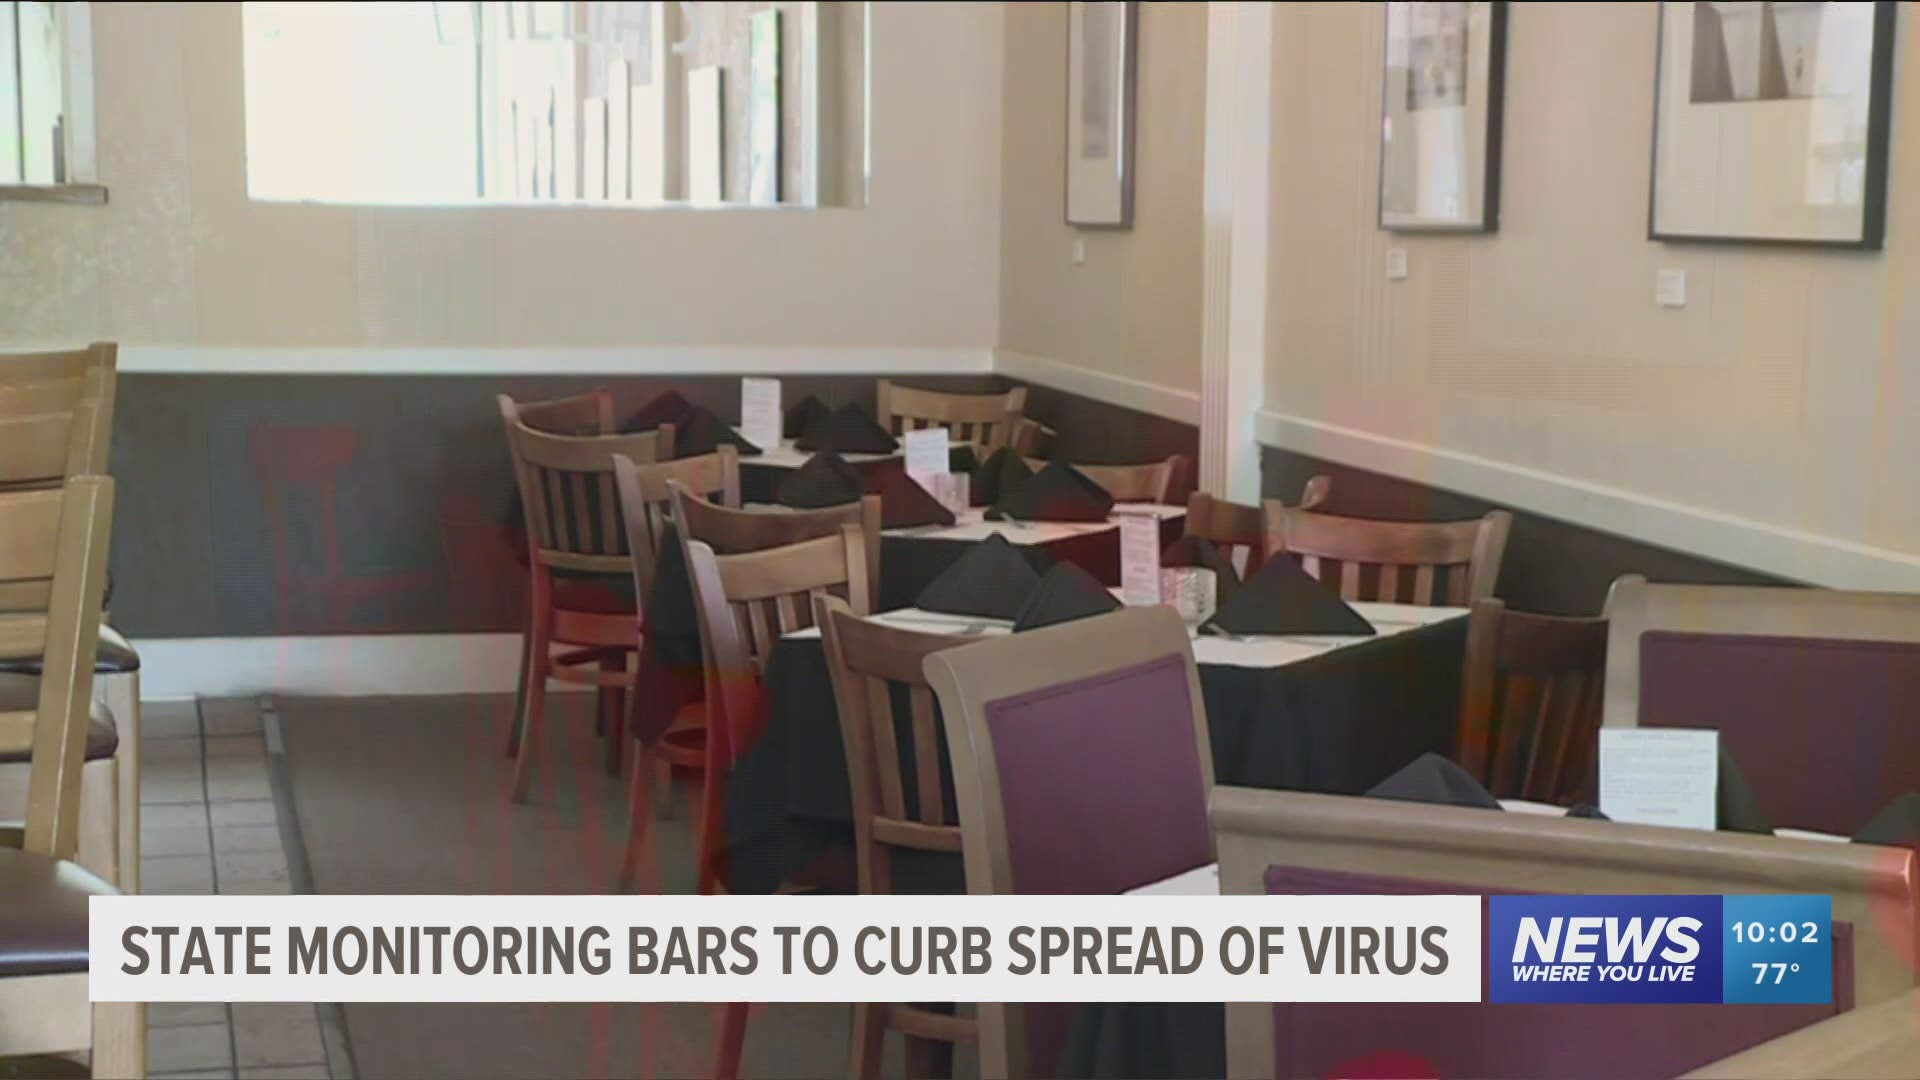 State monitoring bars to curb spread of virus.